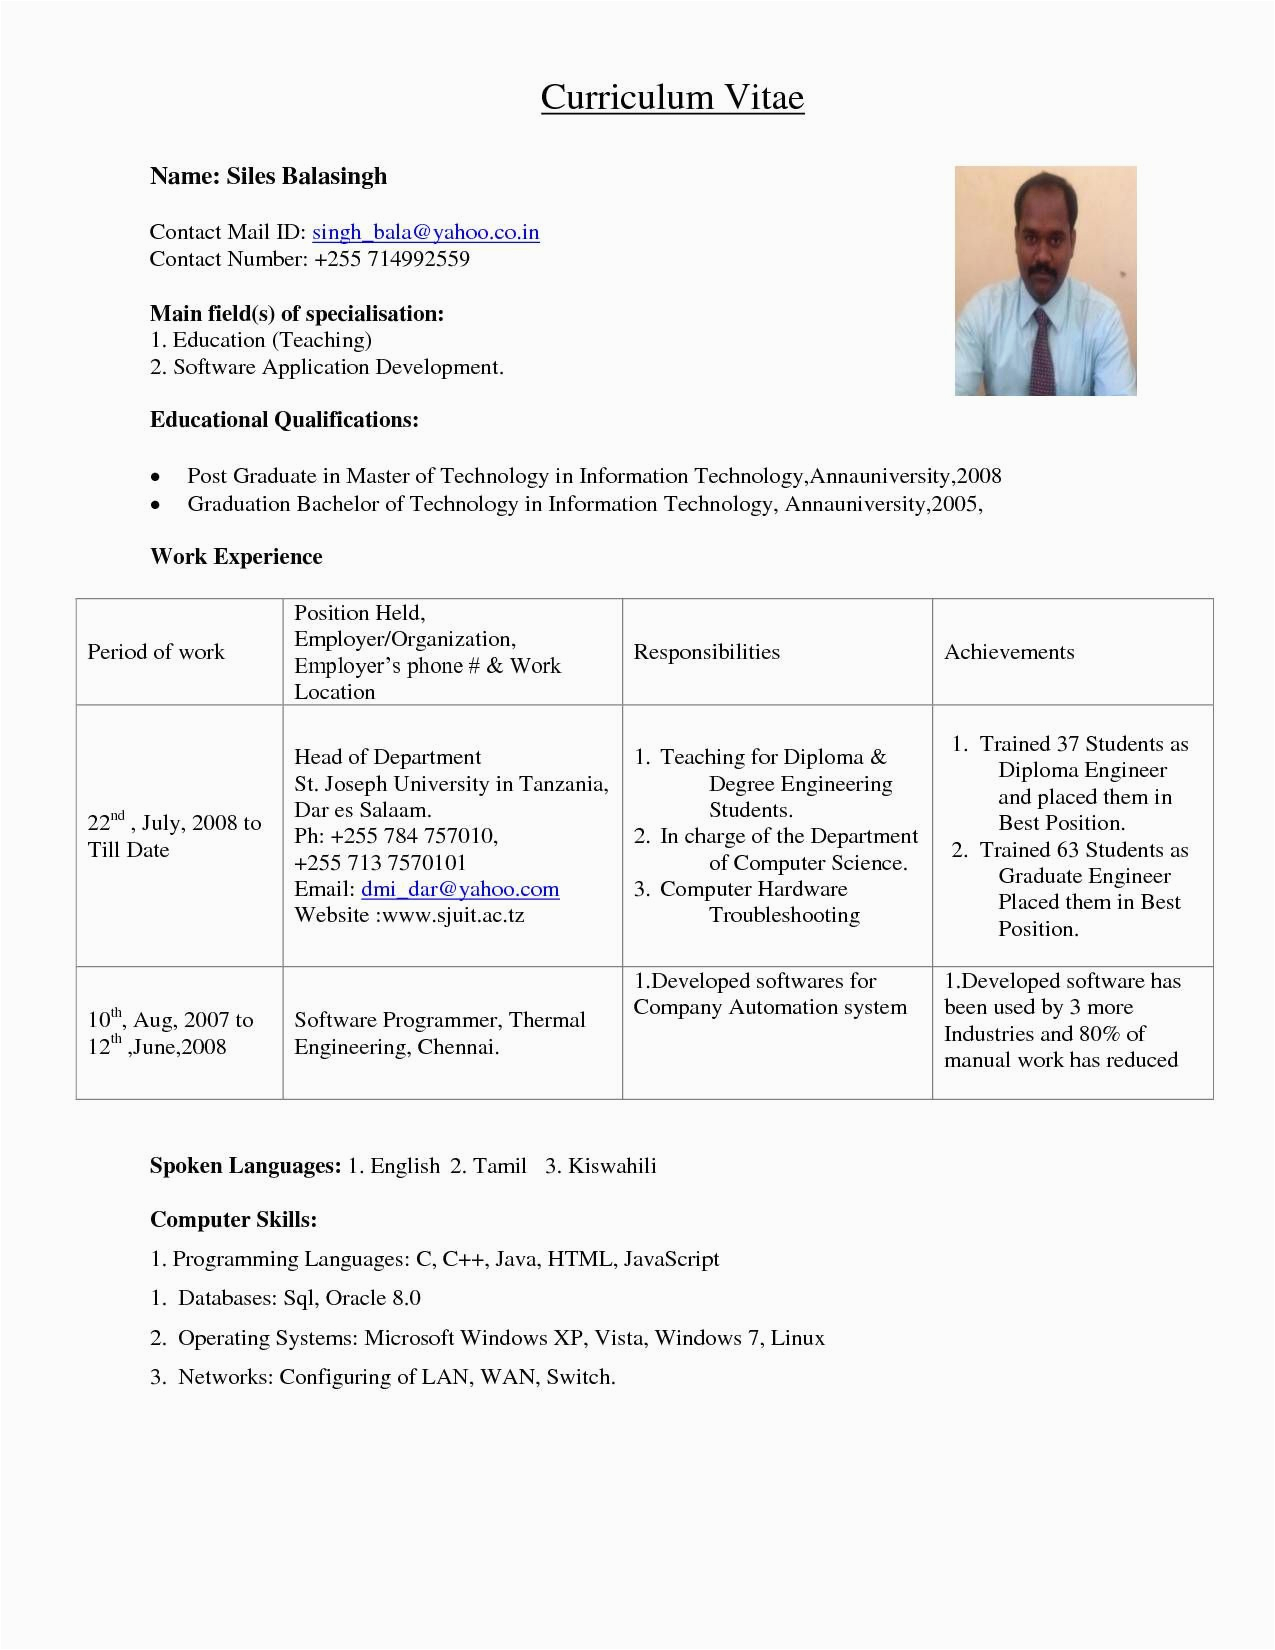 Sample Resume for assistant Professor In Civil Engineering Resume format for Lecturer Job In Engineering College